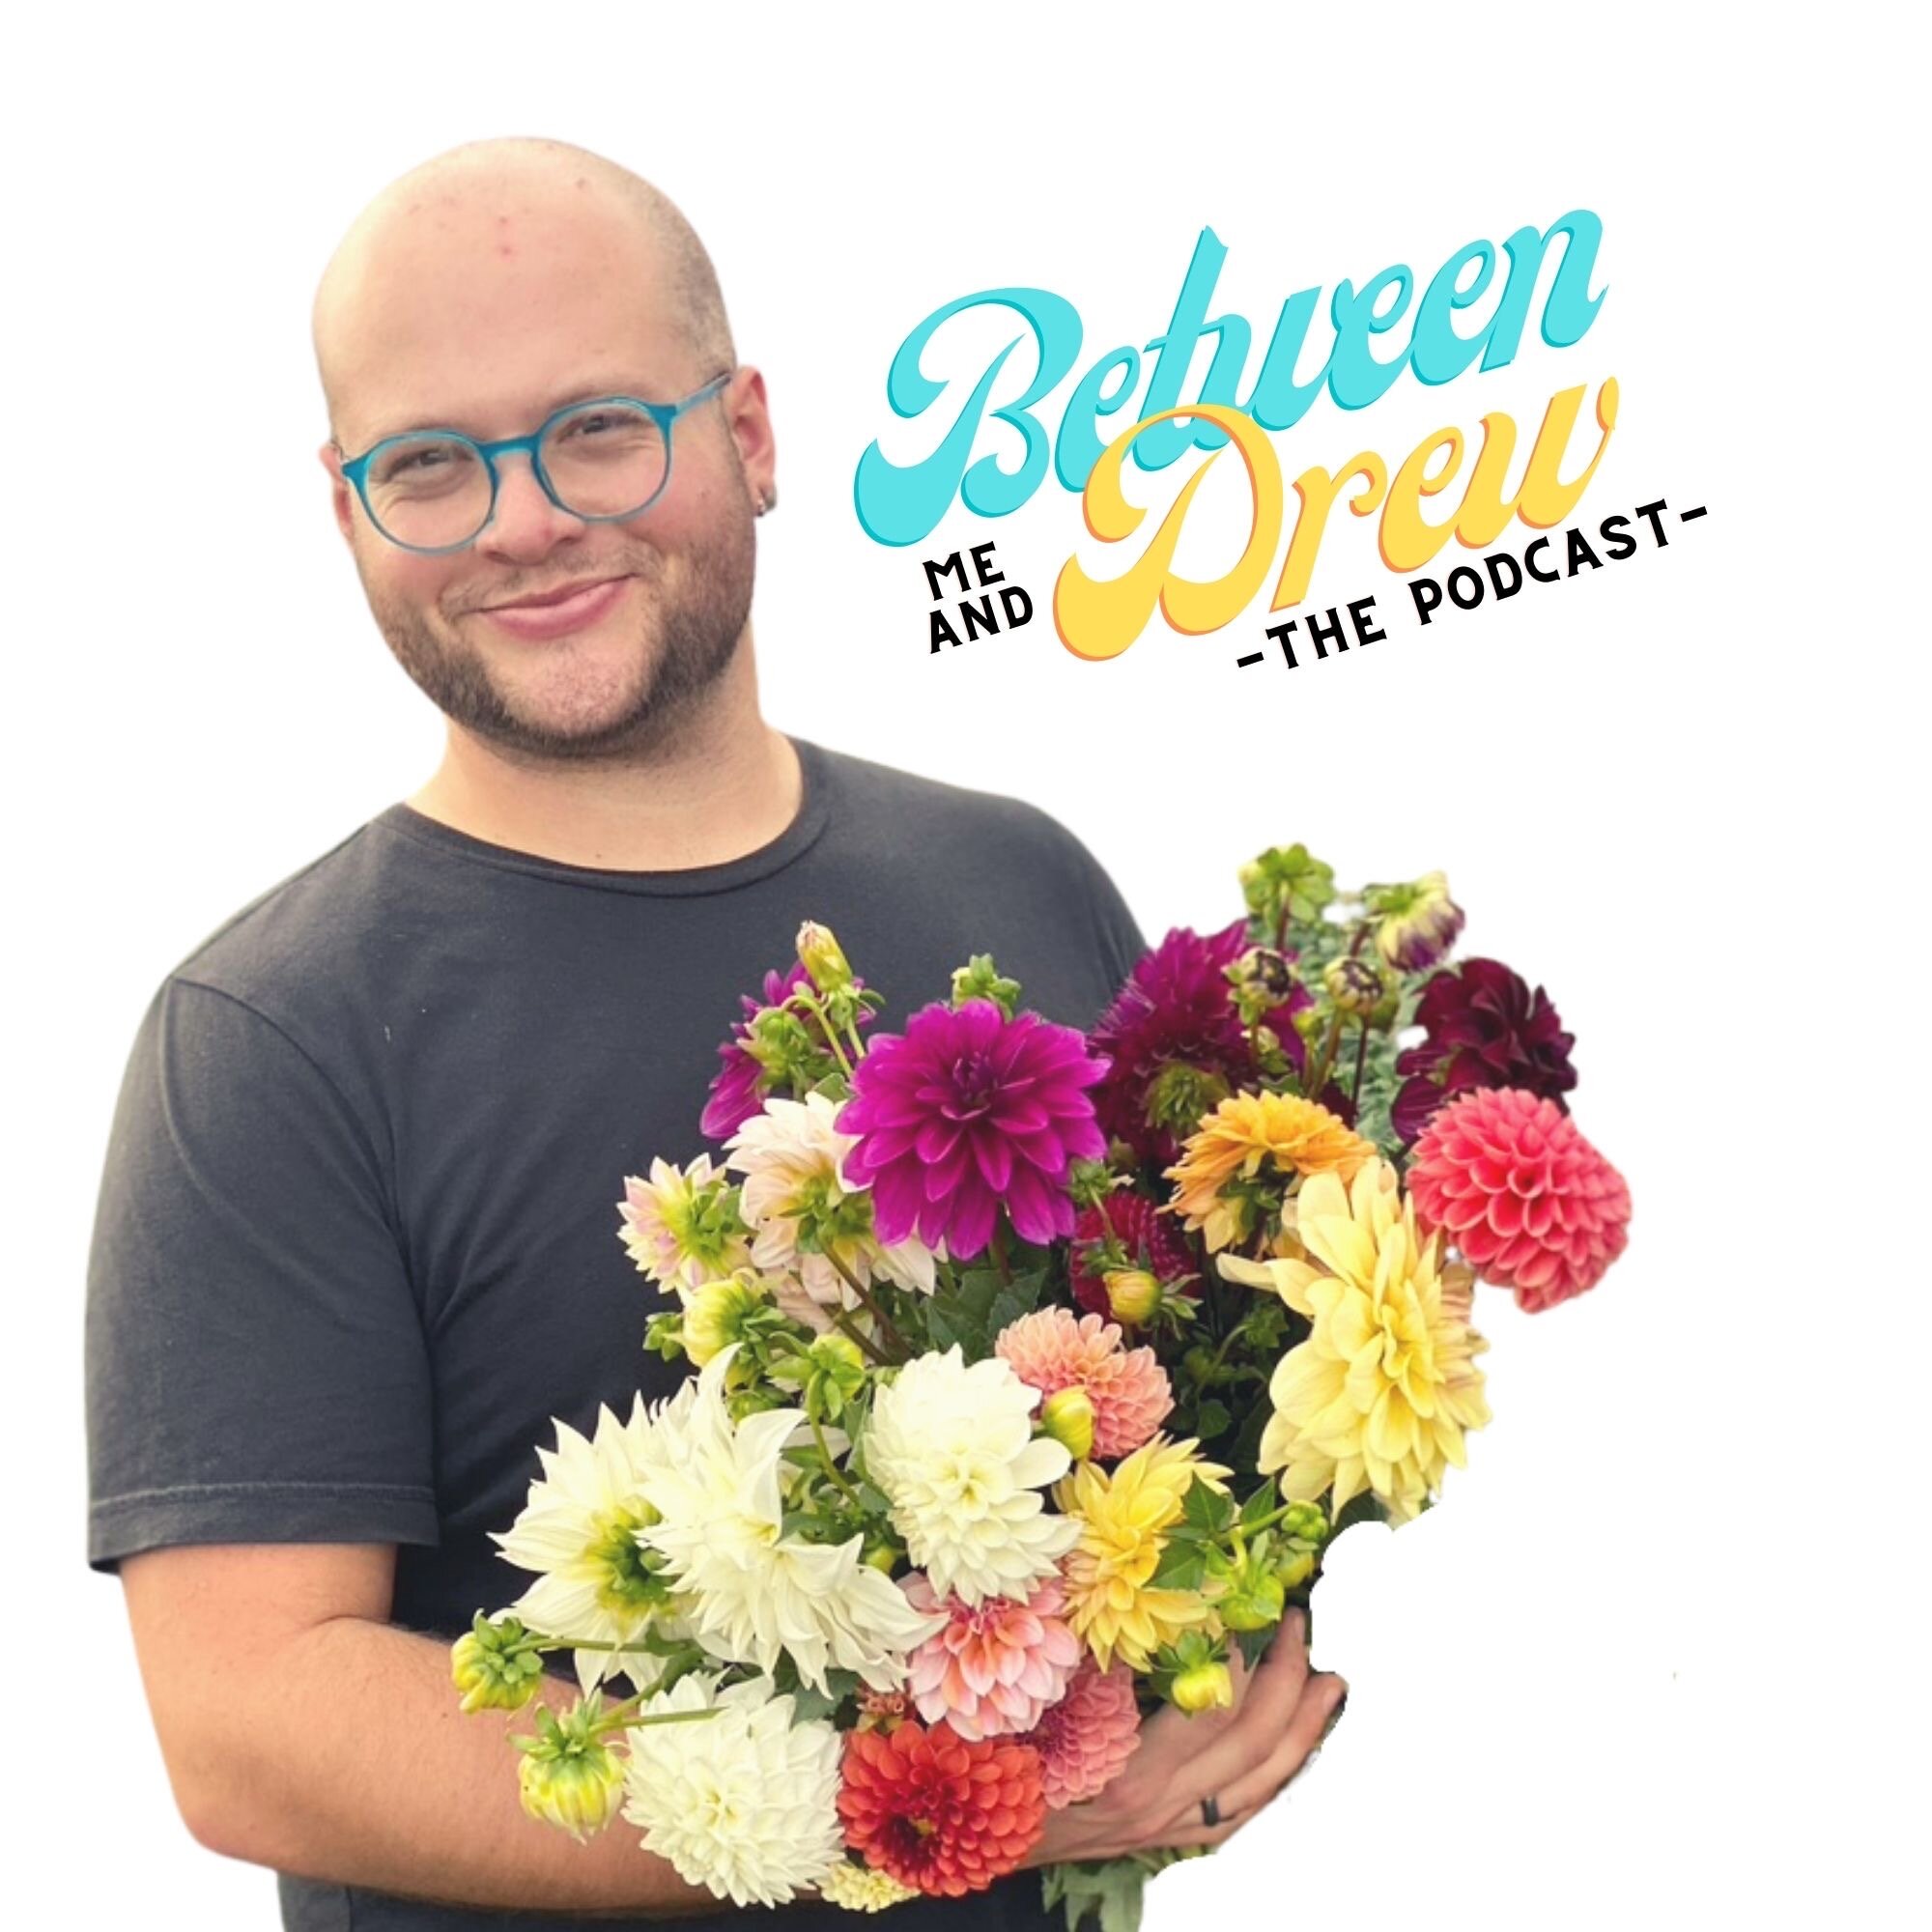 The Flower Podcast